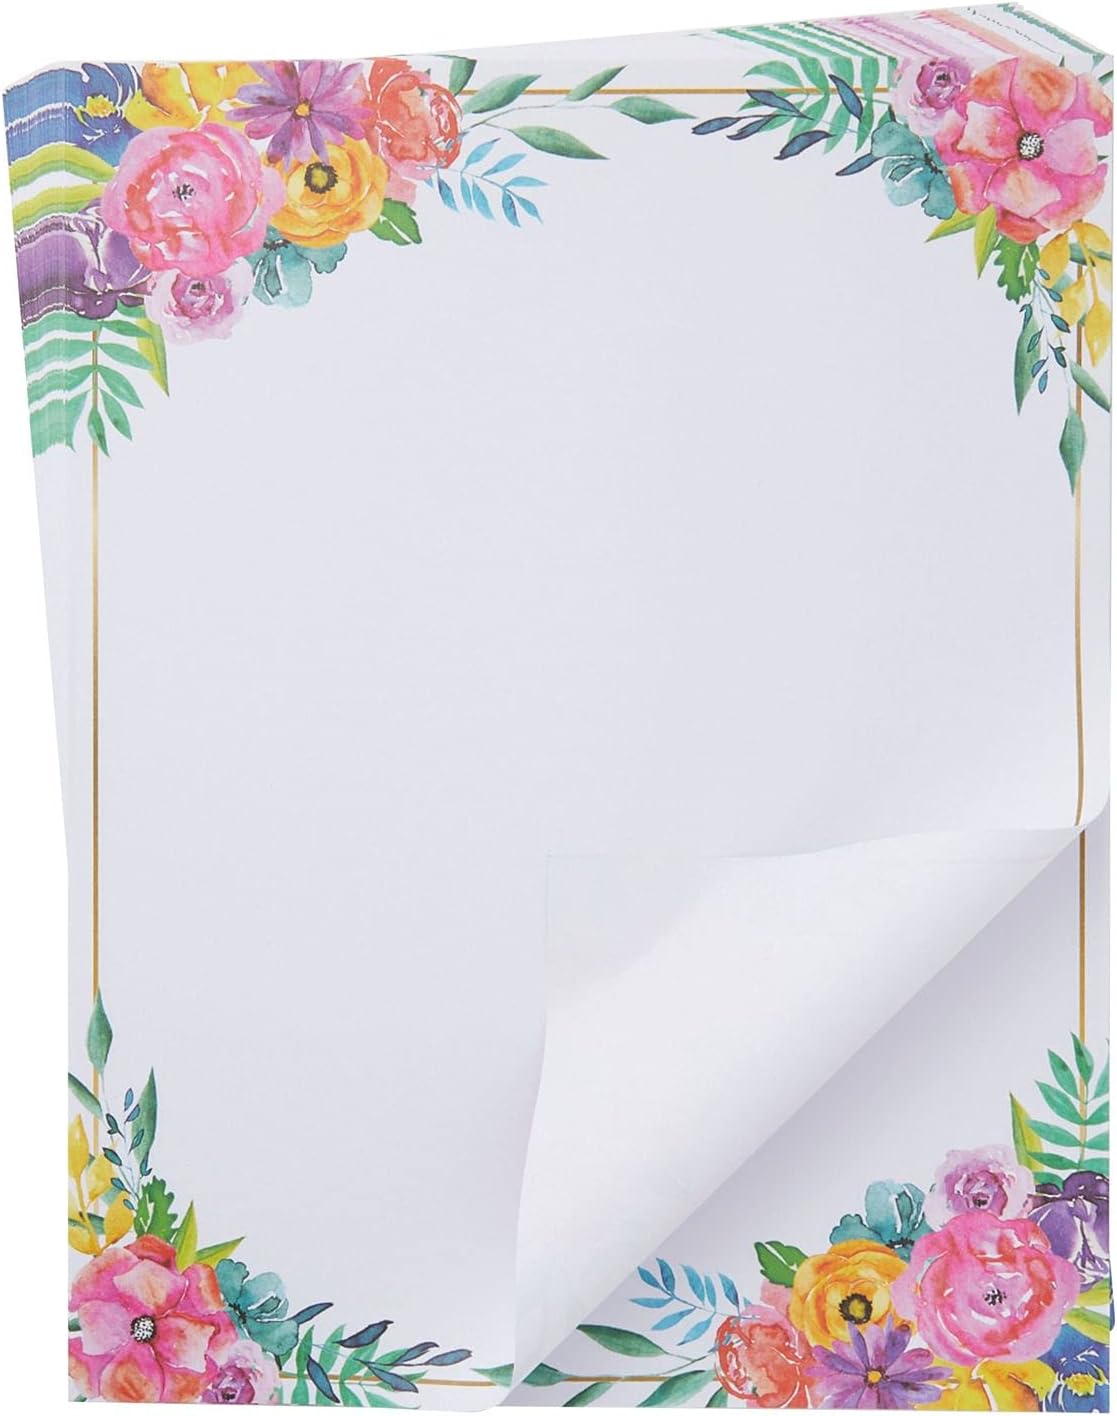 Floral stationery paper for writg letters dia